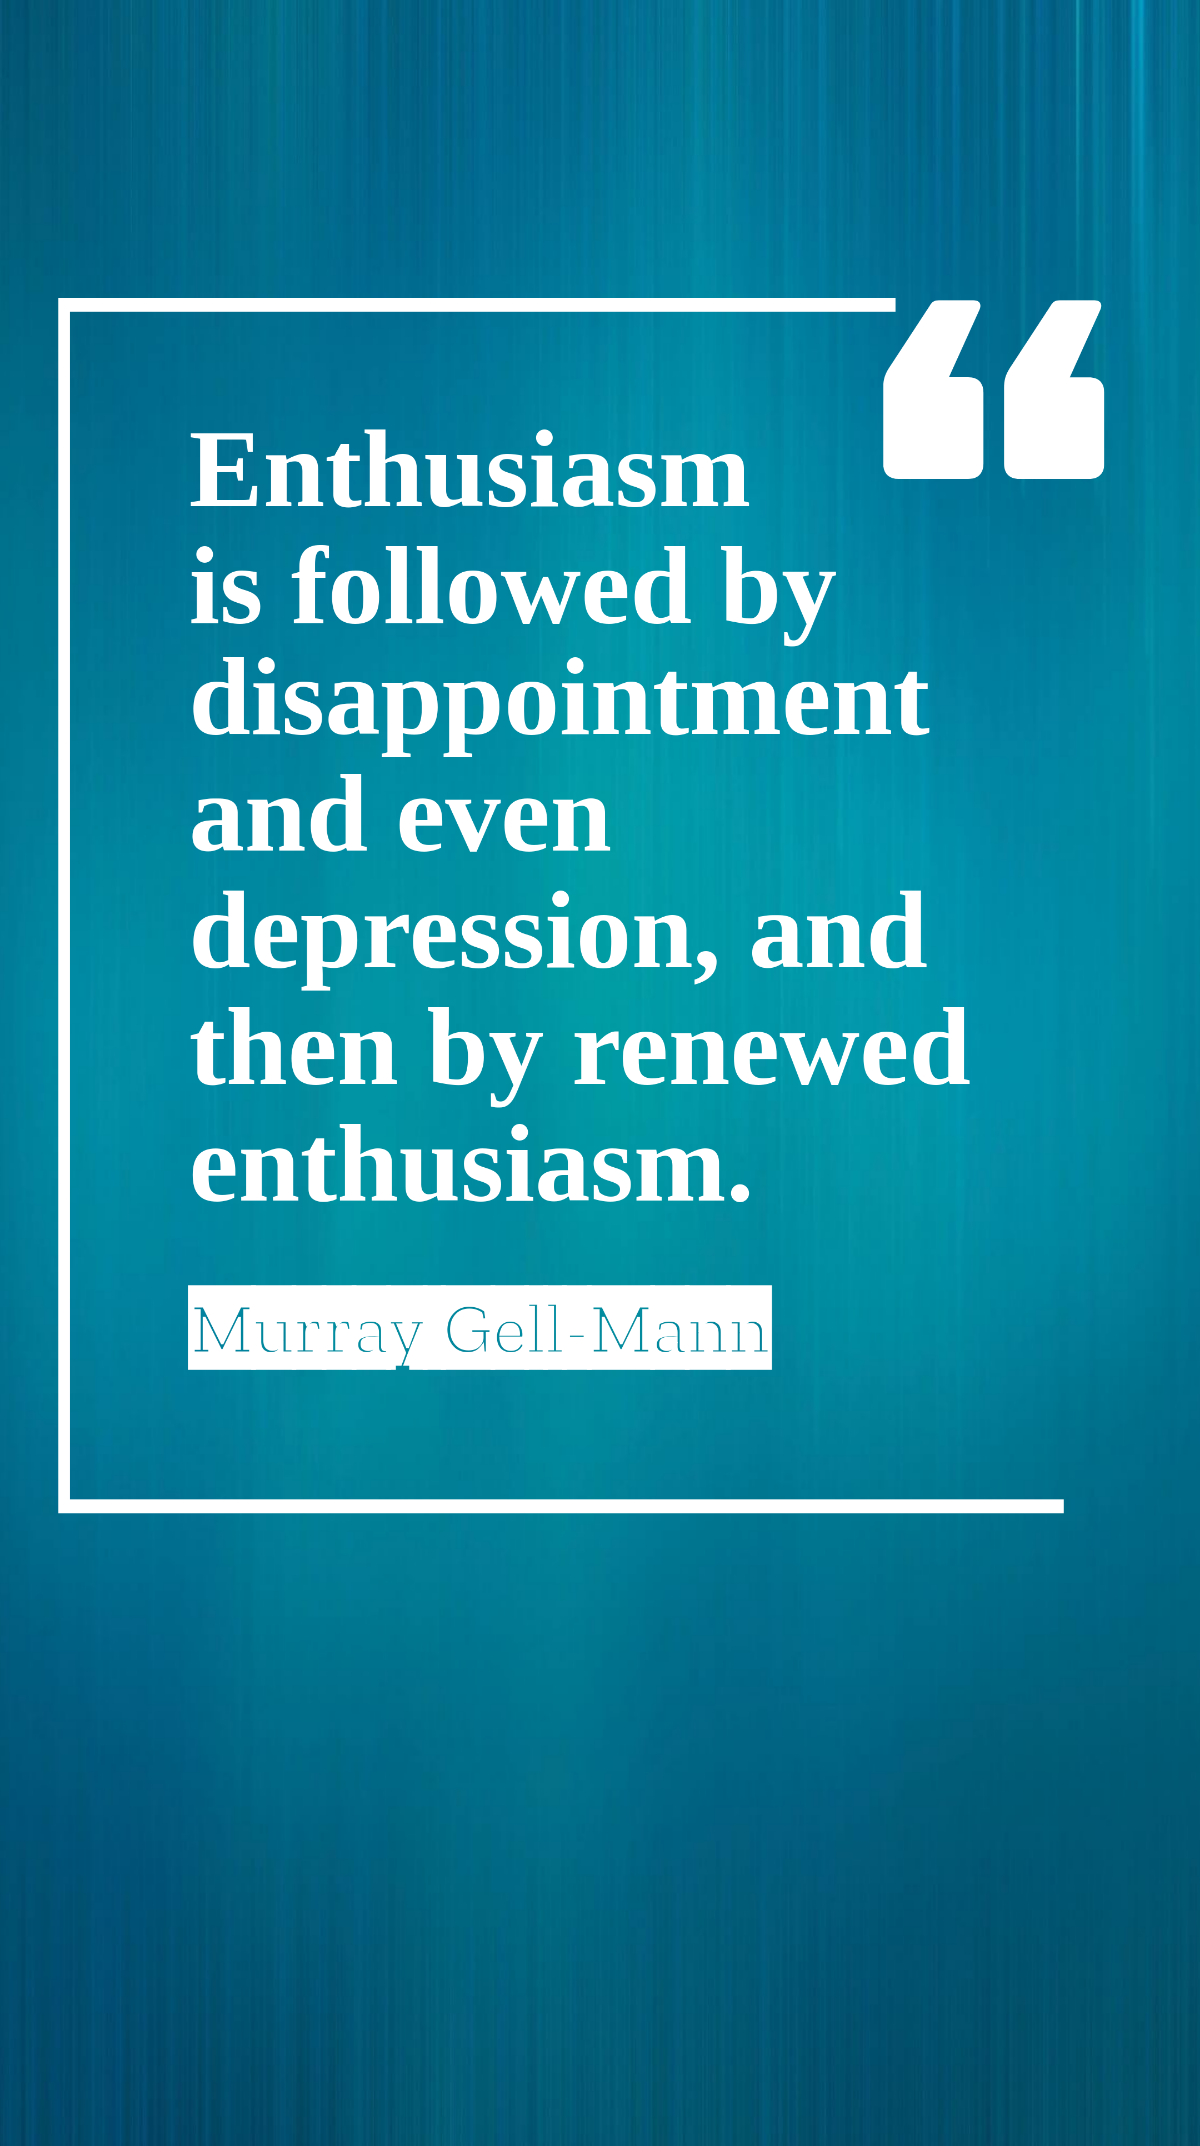 Murray Gell-Mann - Enthusiasm is followed by disappointment and even depression, and then by renewed enthusiasm. Template